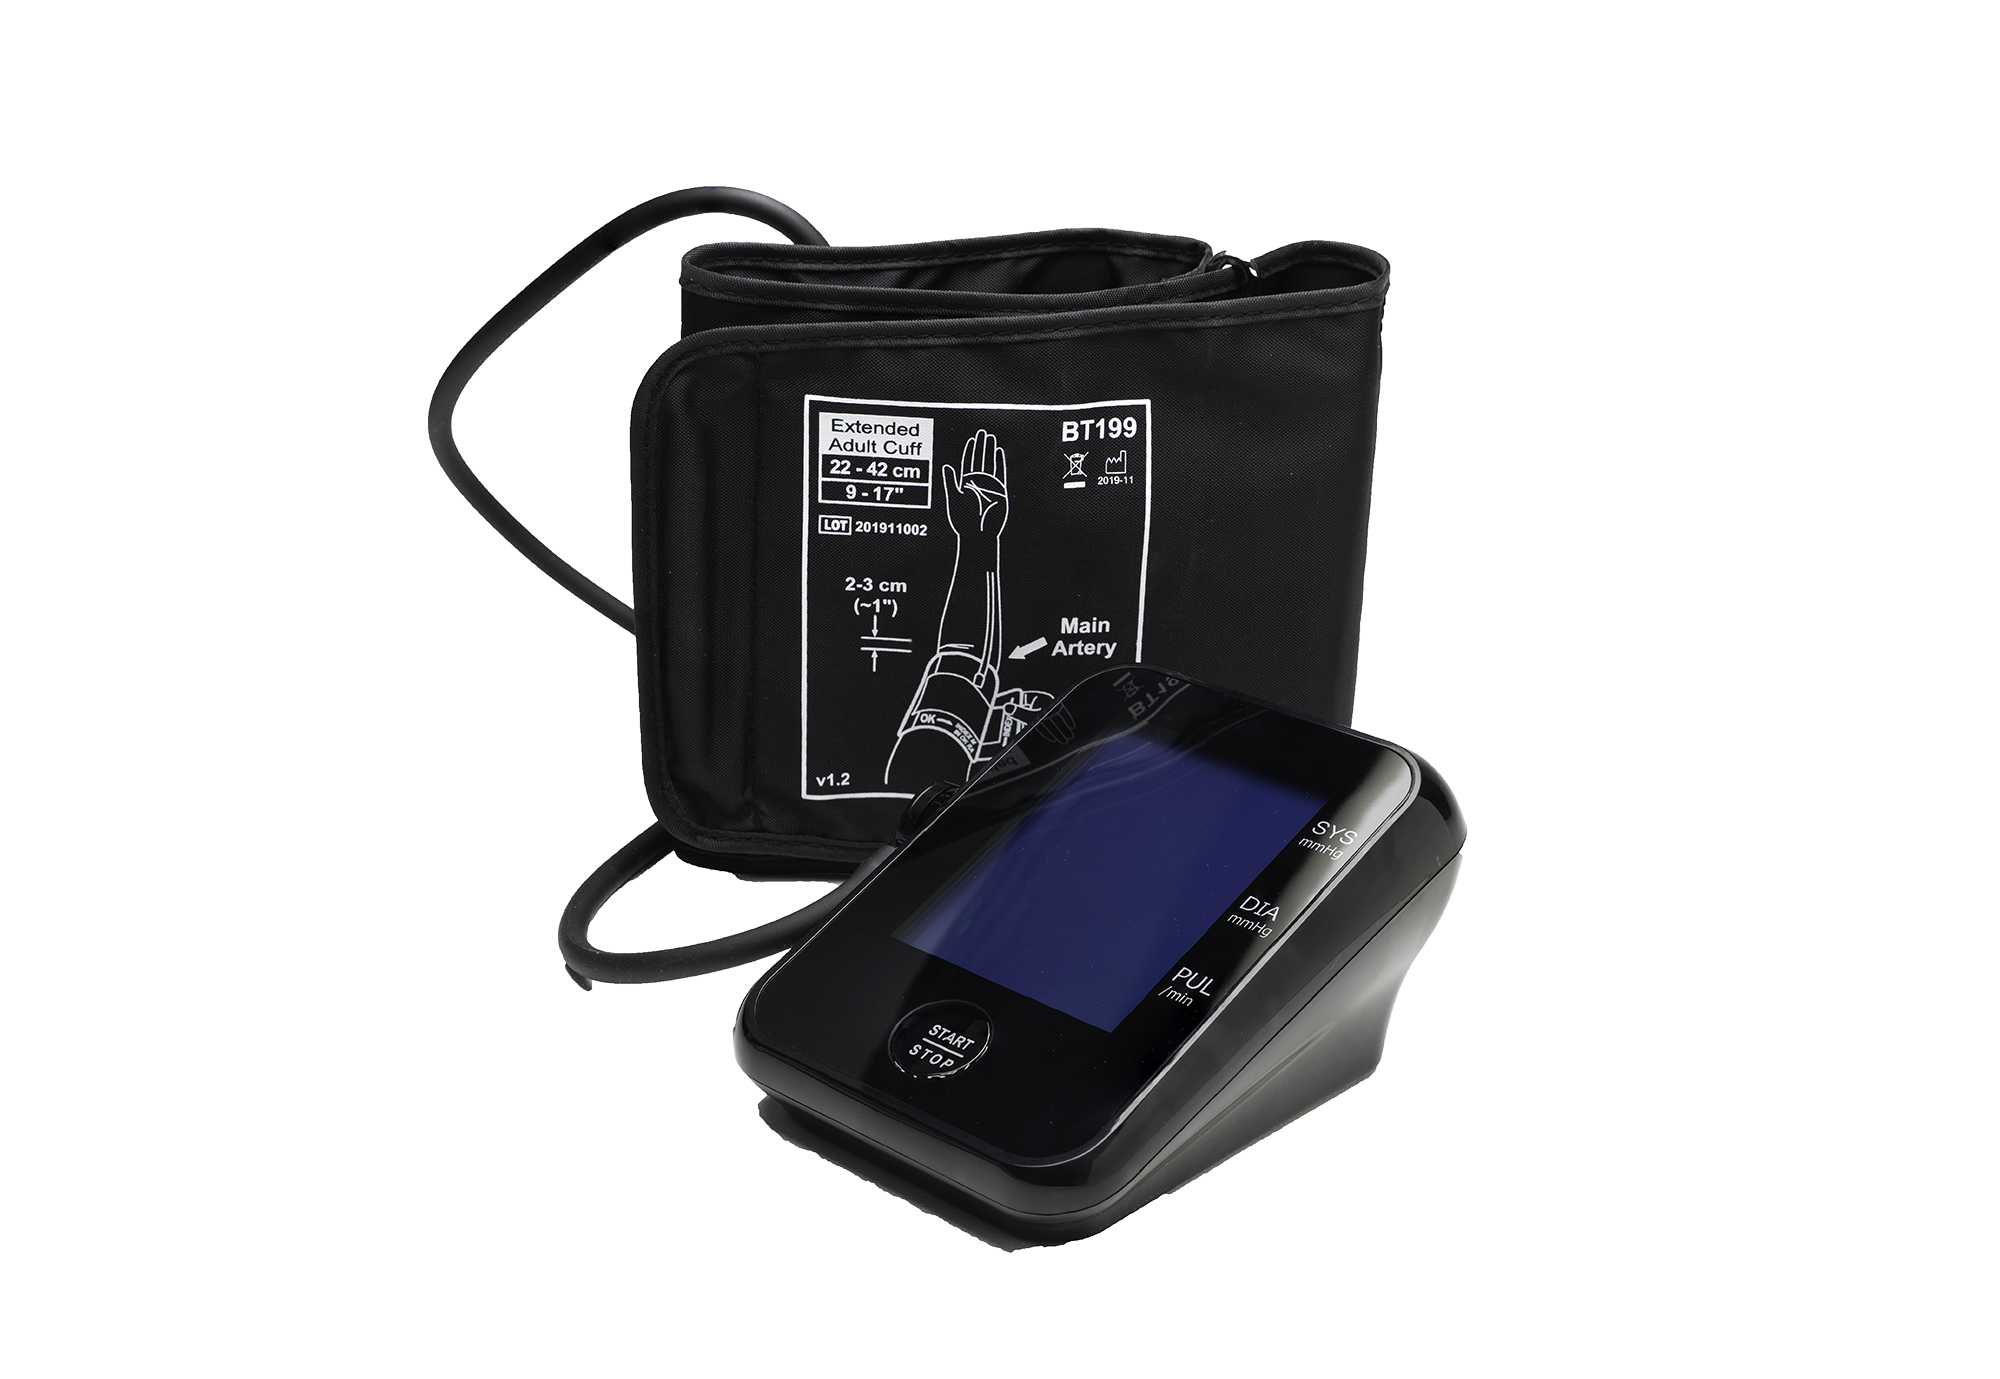 Philips Connected Blood Pressure Monitor – BioTelemetry, a Philips company